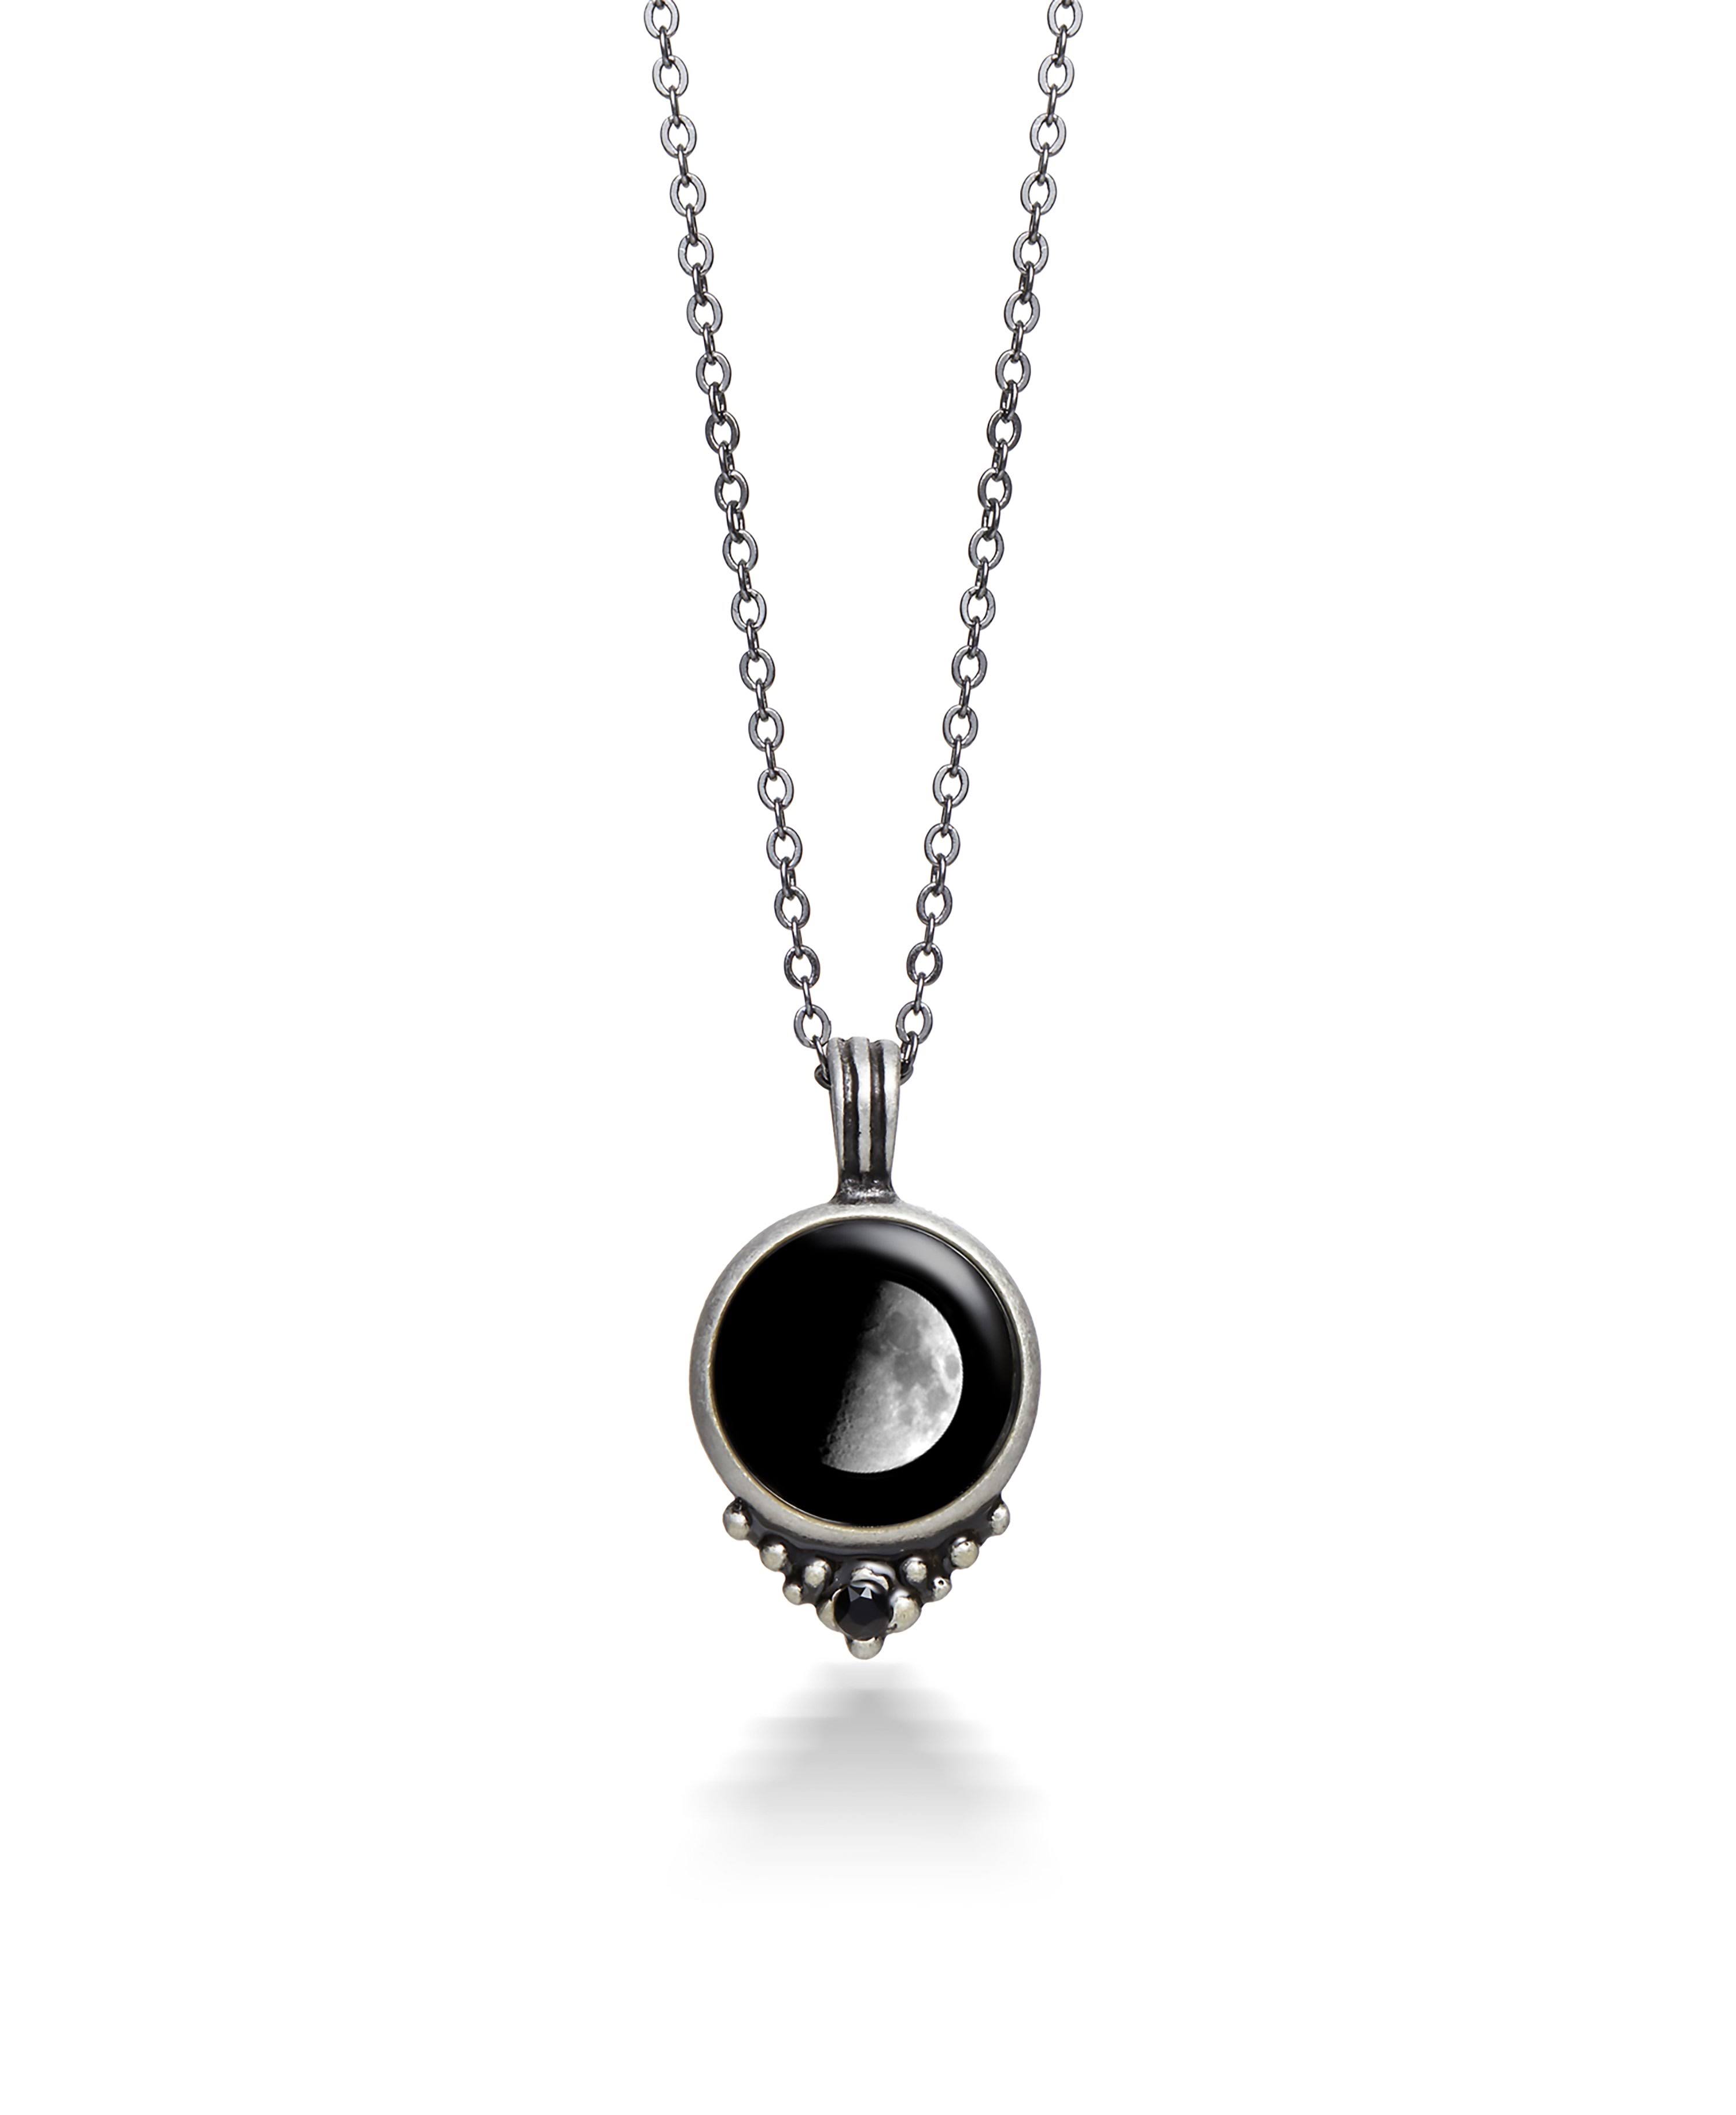 Moonglow Pewter Necklace 4A